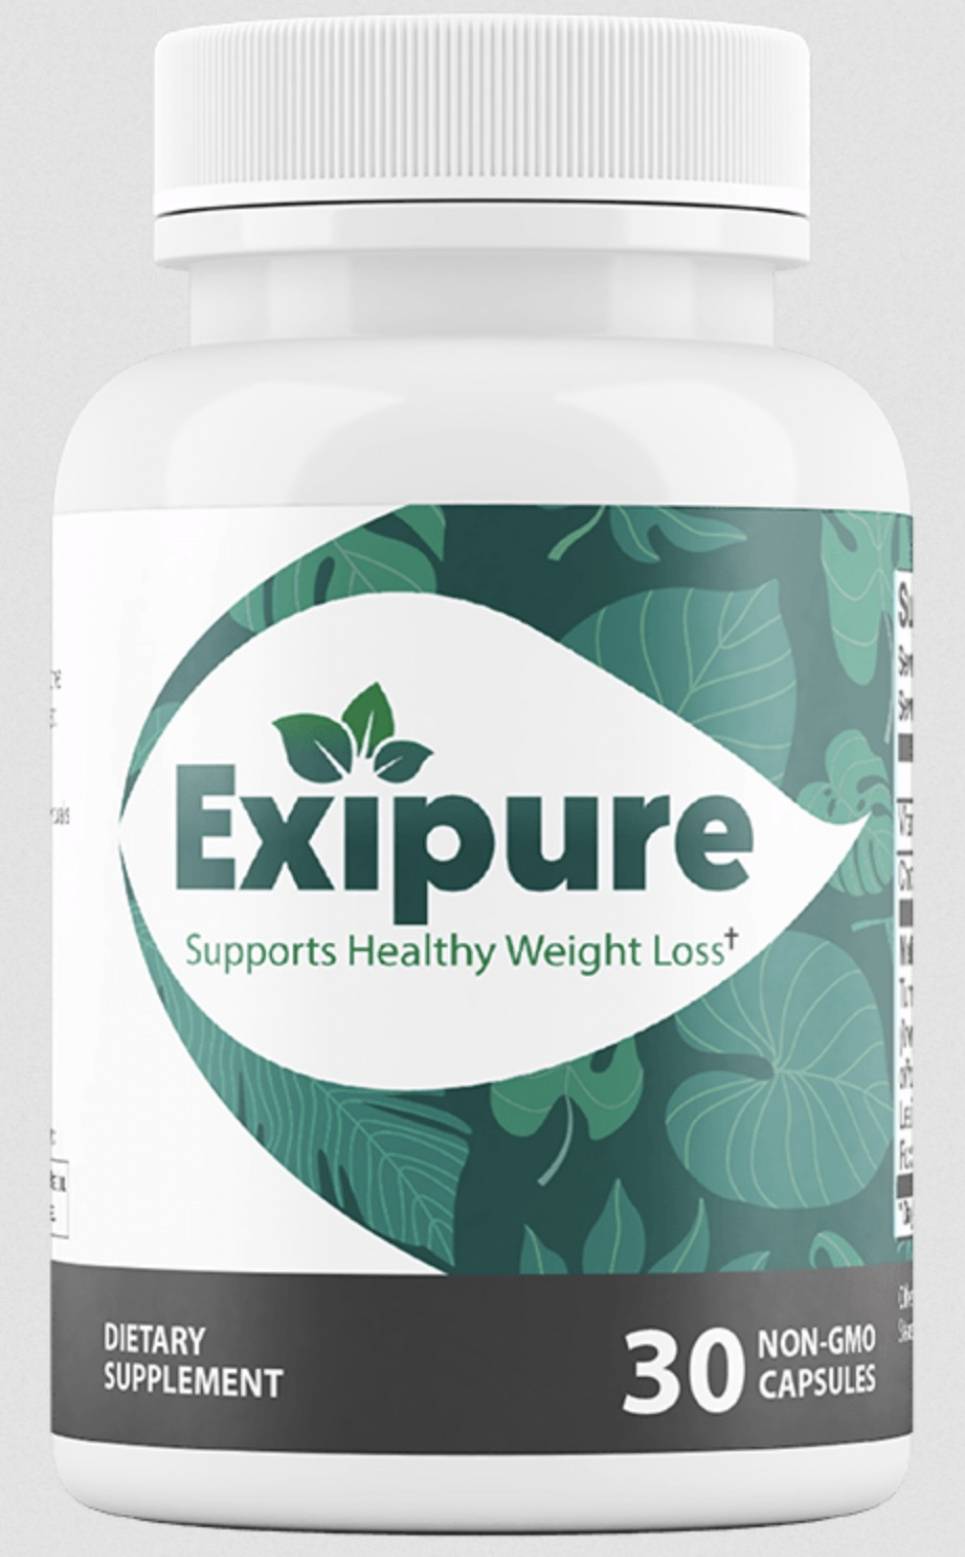 What Is The Official Website For Exipure